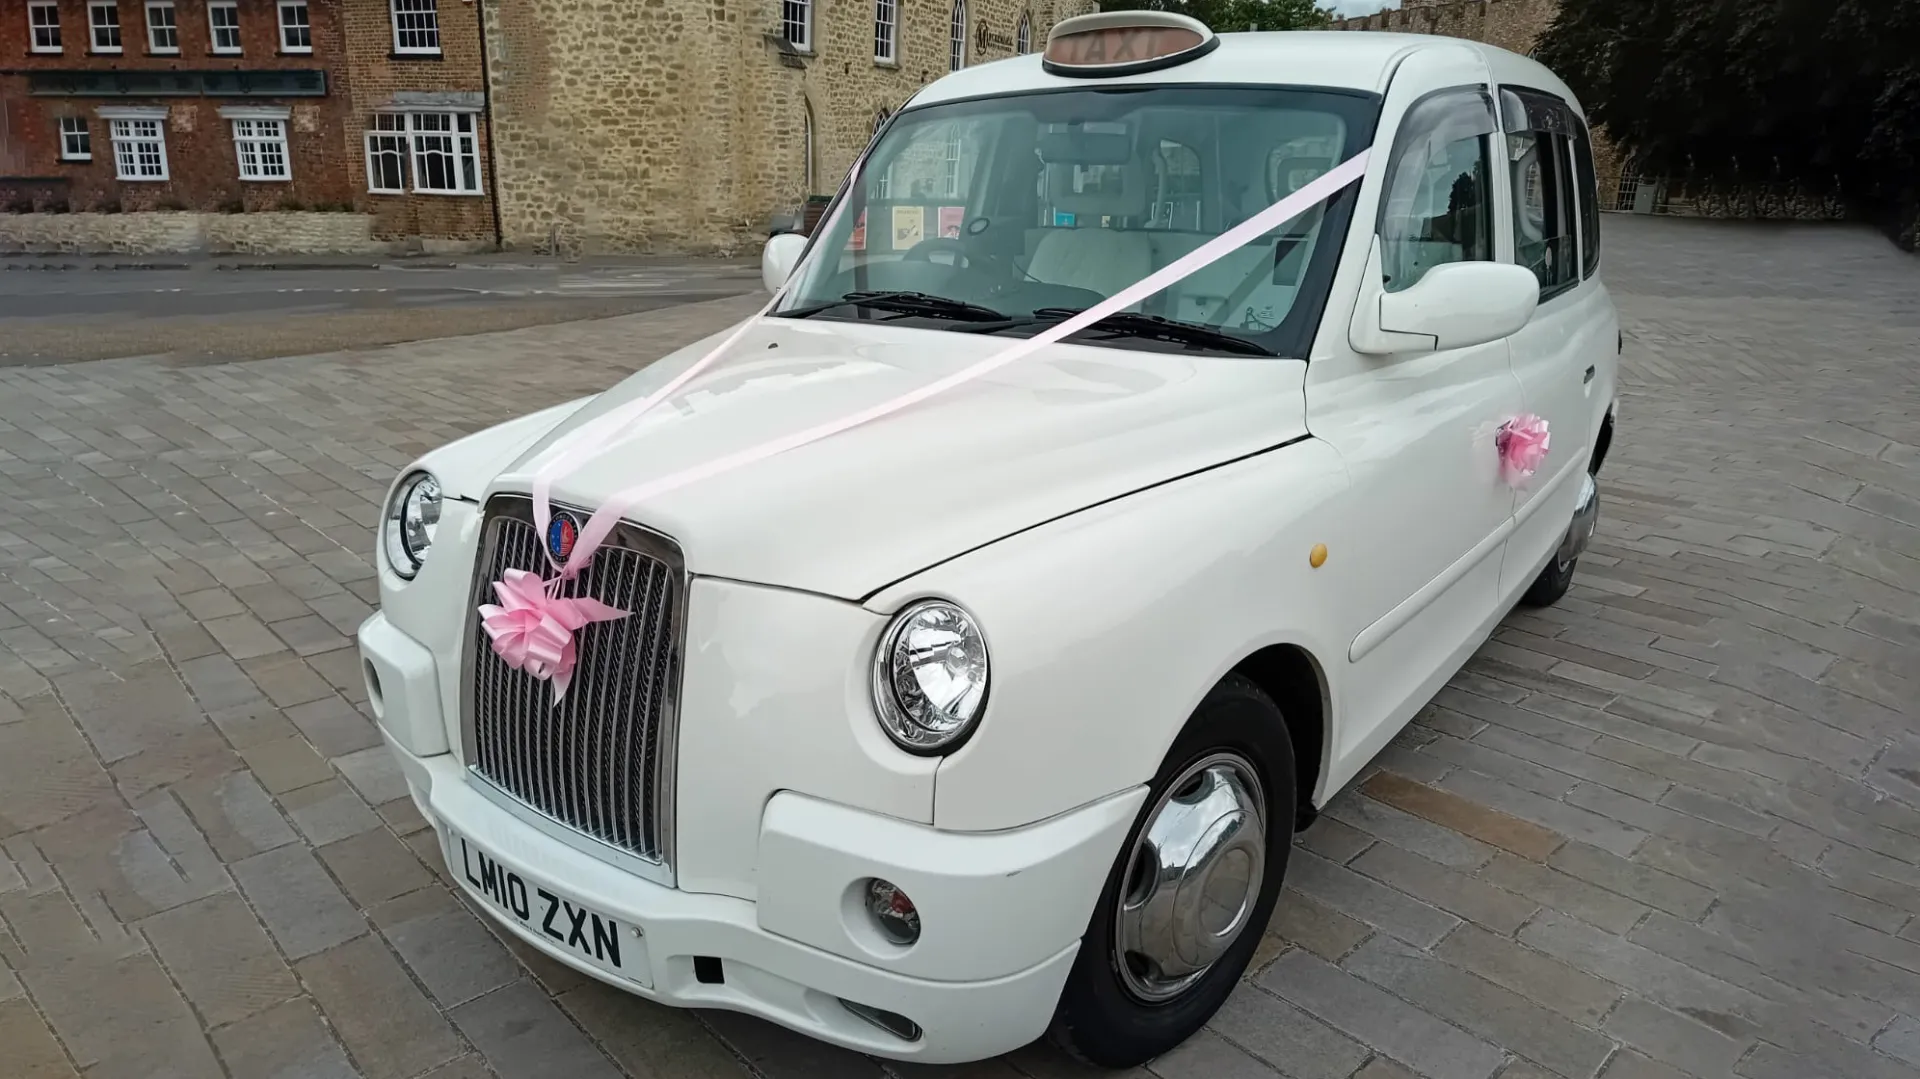 Side front view of White Modern Taxi Cab decorated with pink Wedding ribbons and bow